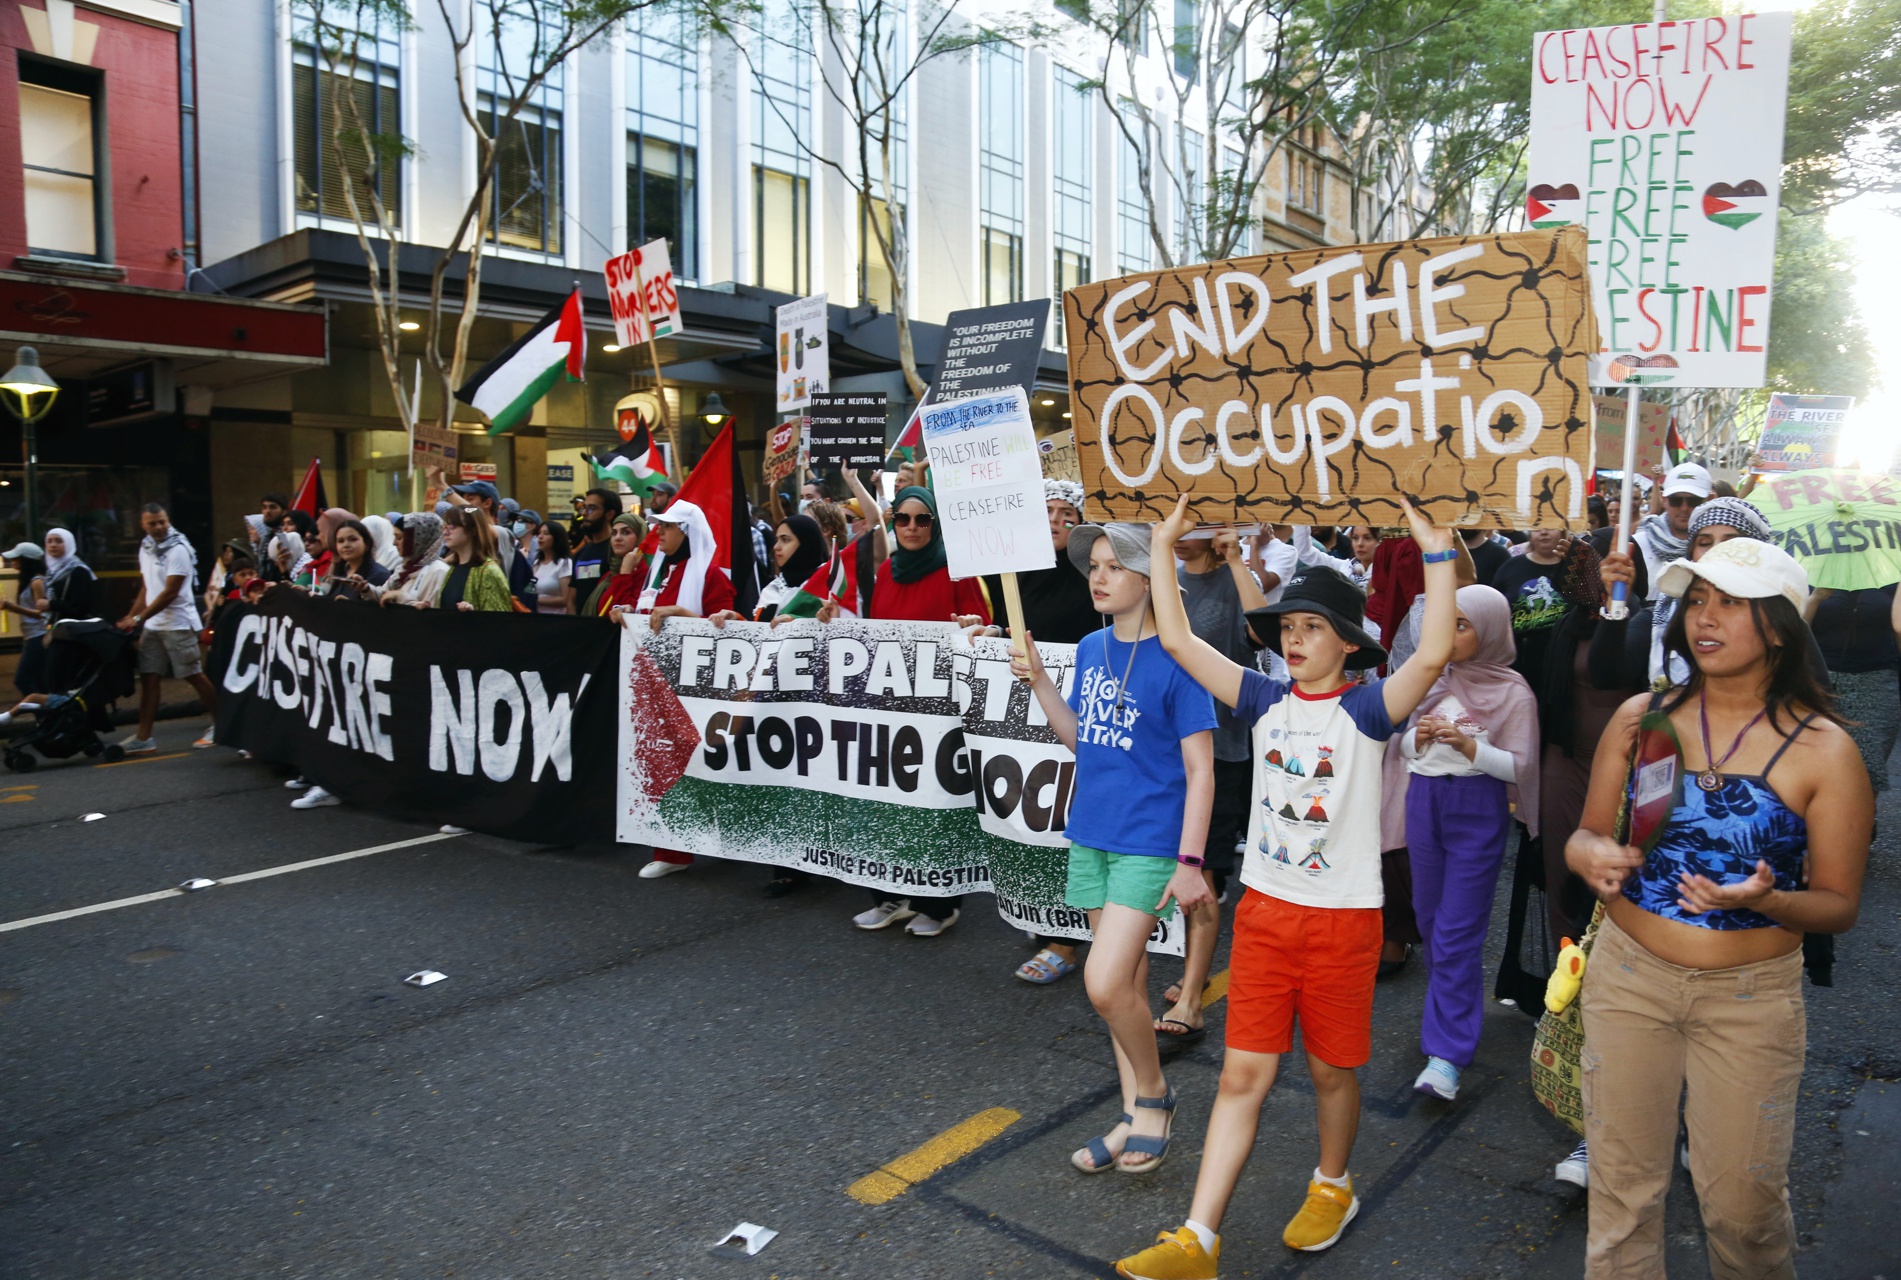 End the occupation